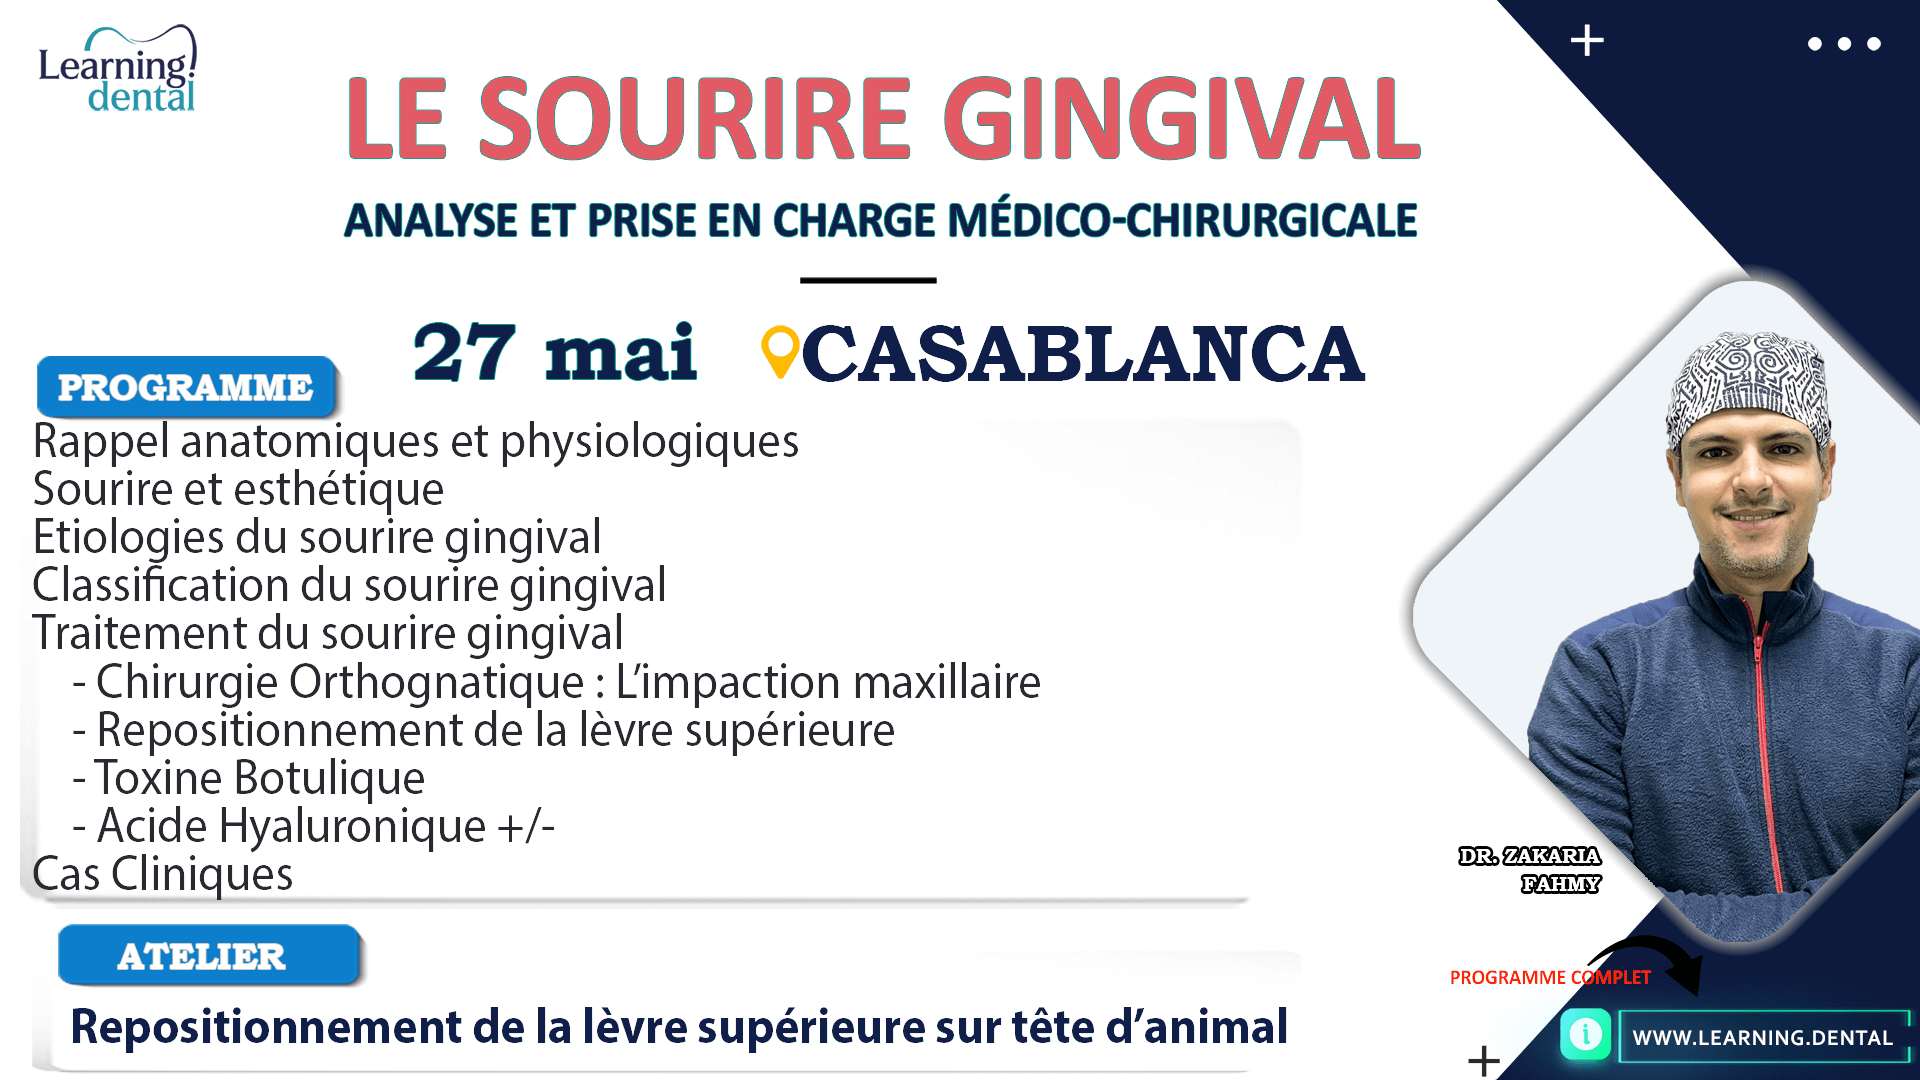 Le sourire gingival : Analyse et prise en charge médico-chirurgicale